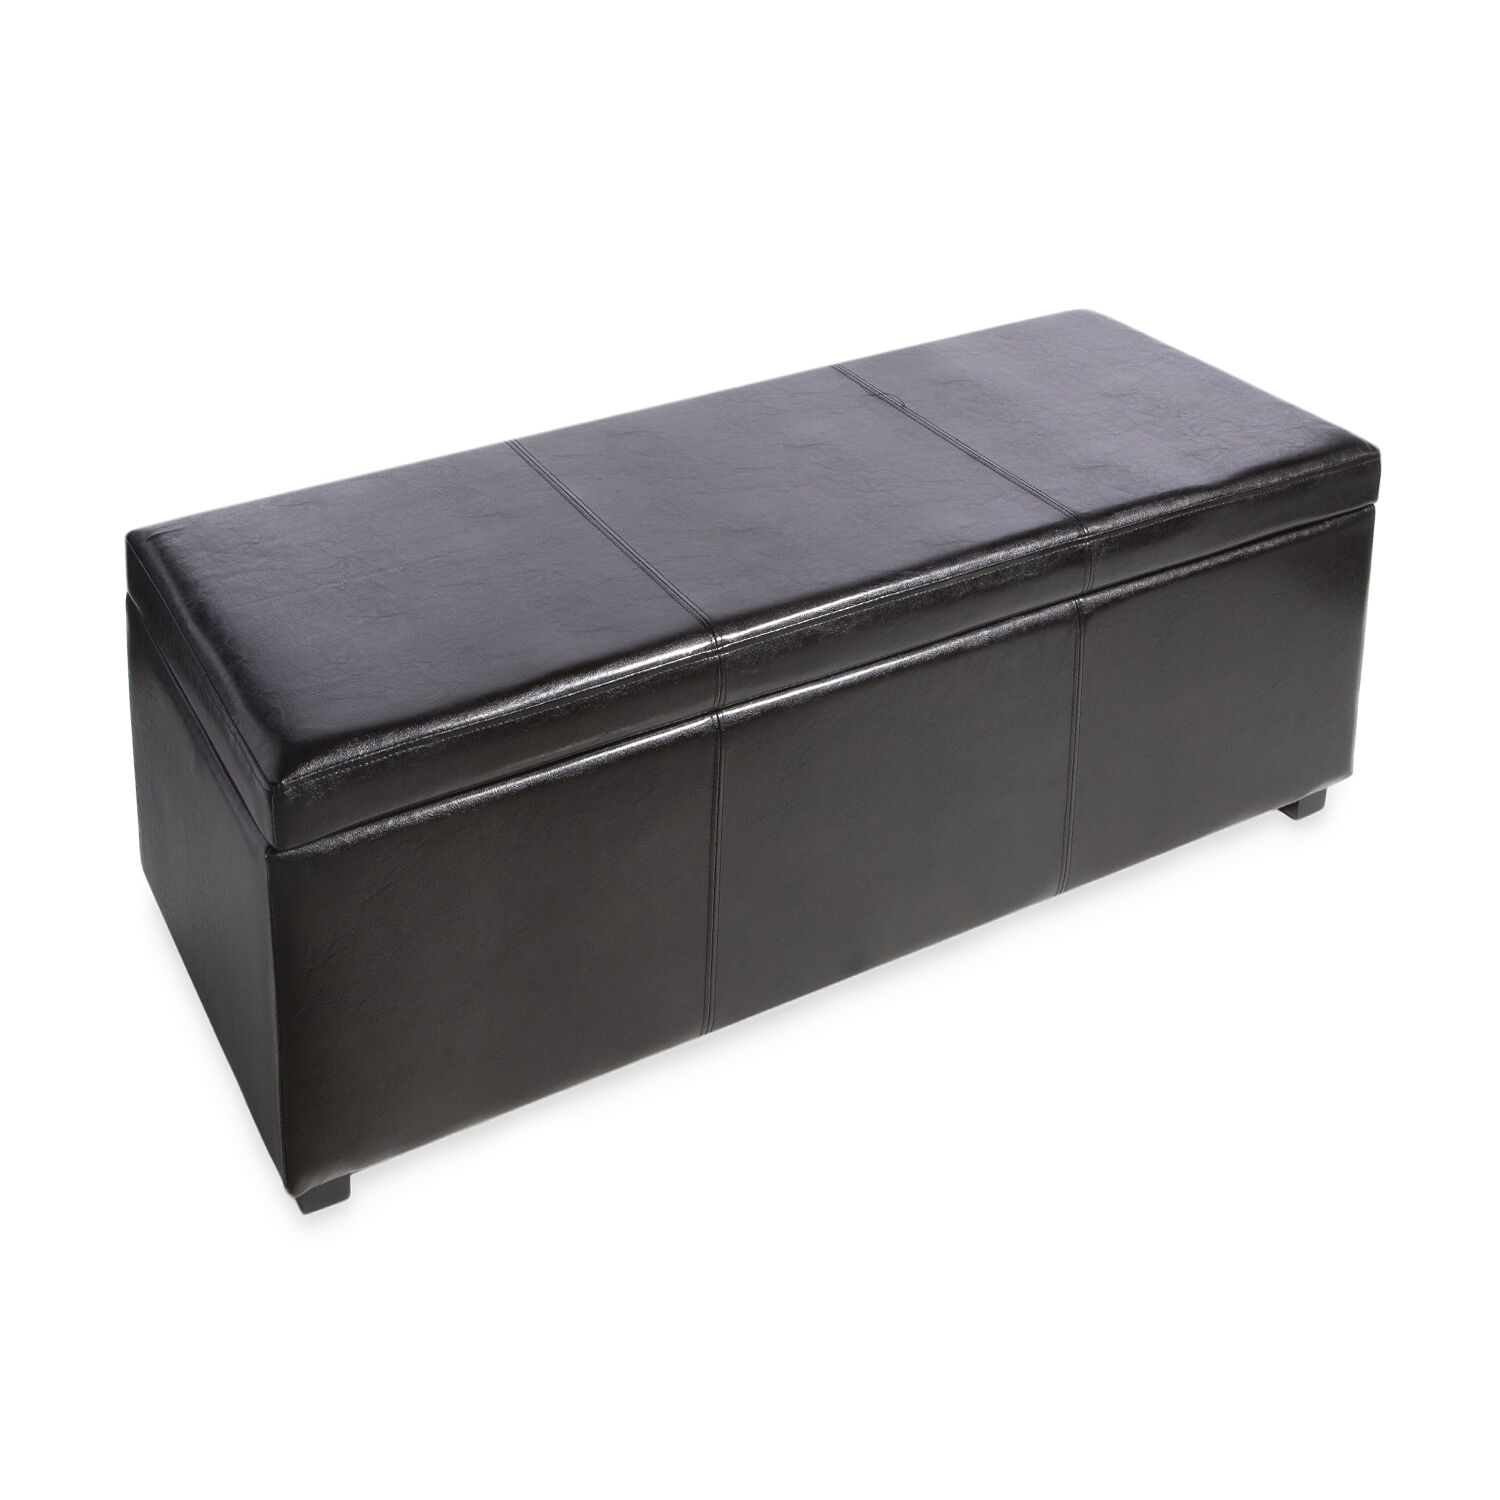 Faux Leather Storage Bench Ottoman, Faux Leather Ottomans With Storage